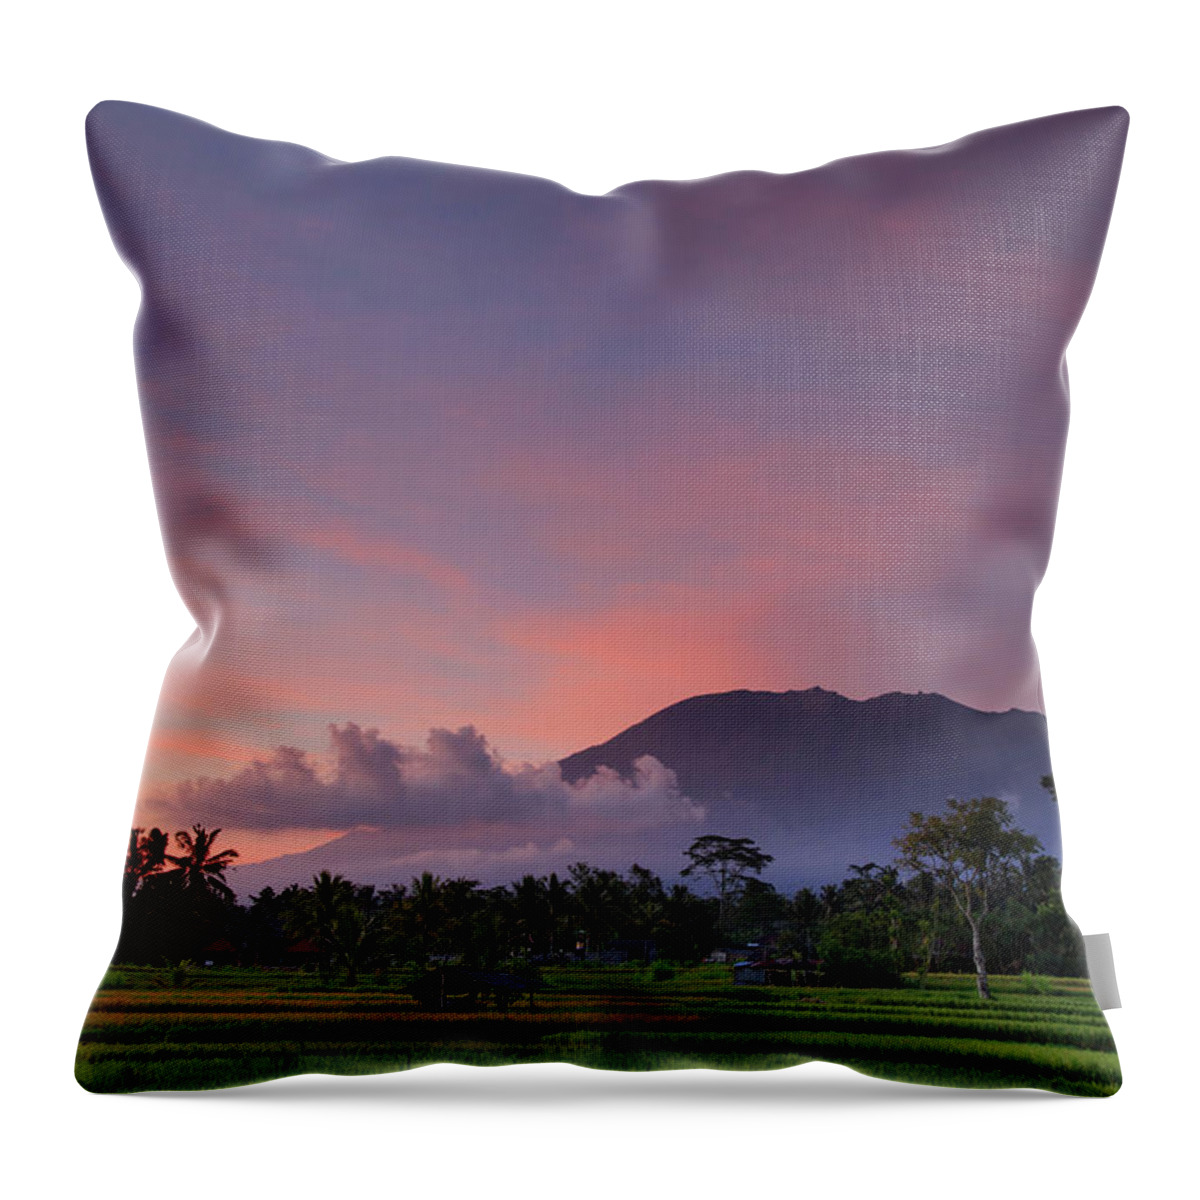 Scenics Throw Pillow featuring the photograph Indonesia, Bali, Rice Fields And #19 by Michele Falzone